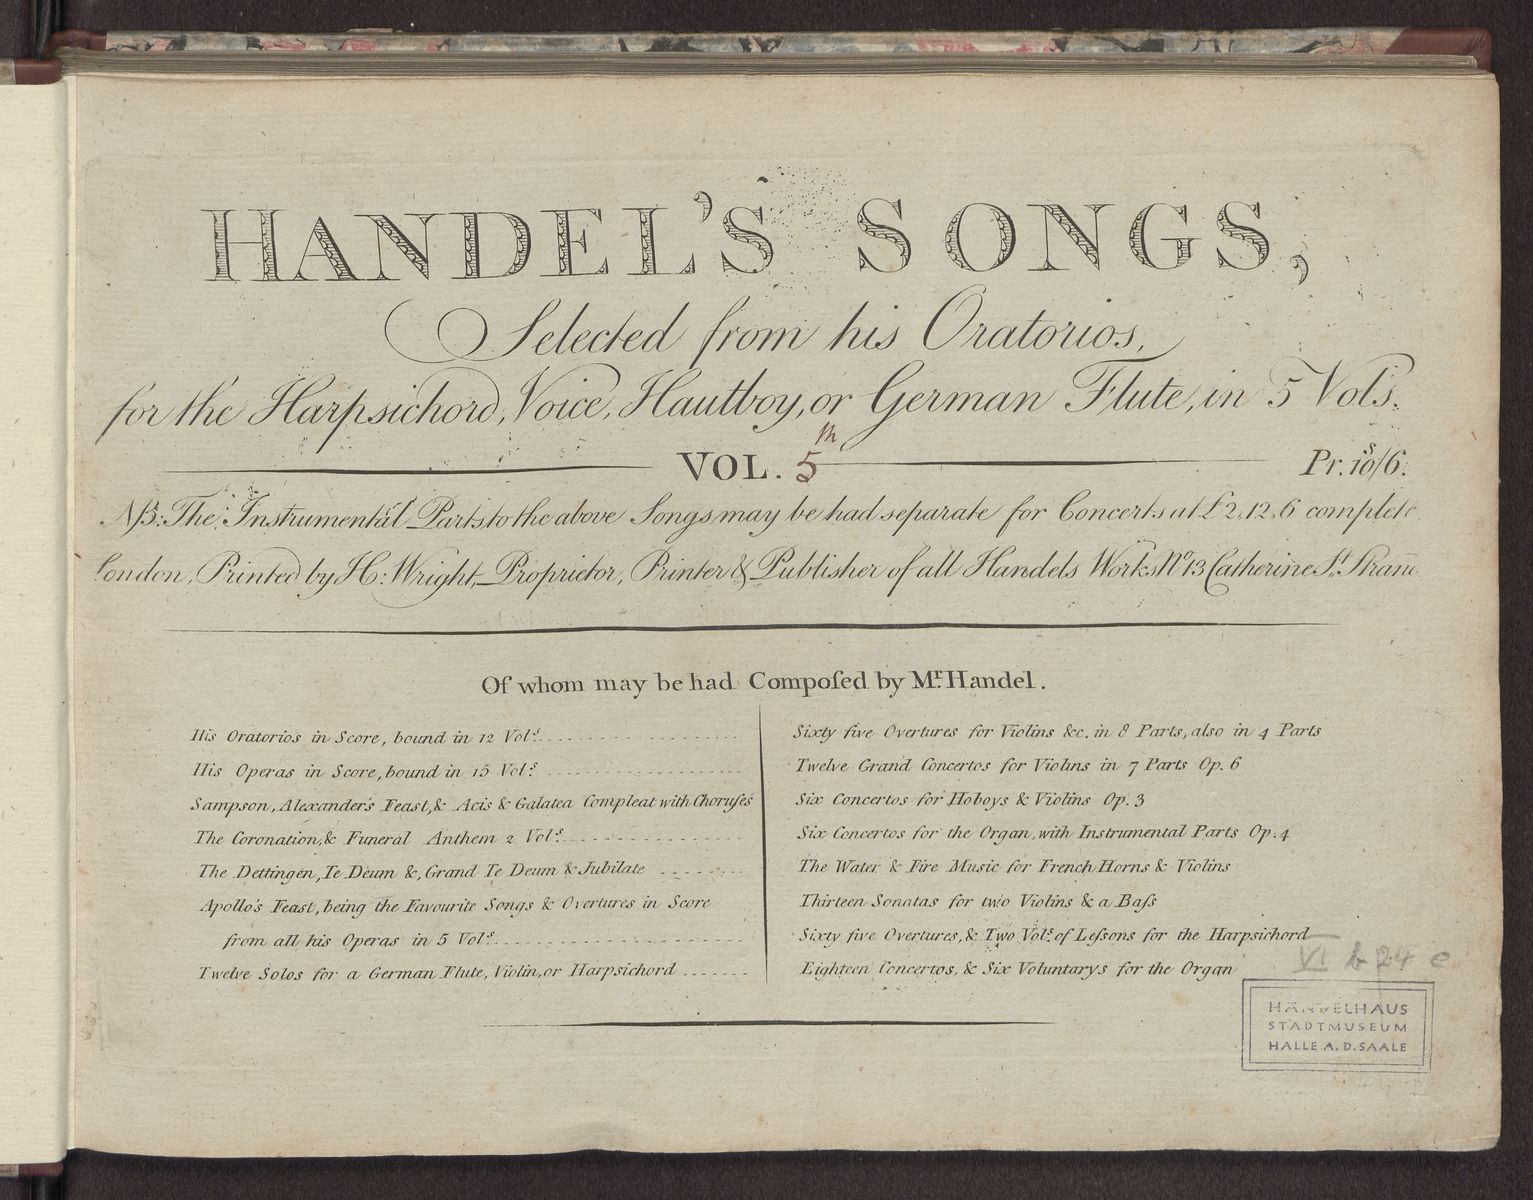 Handel’s Songs Selected from his Oratorios : for the Harpsichord, Voice, Hautboy, or German Flute ... ; Vol. 5, Abbildung 6 (Stiftung Händel-Haus Halle CC BY-NC-SA)